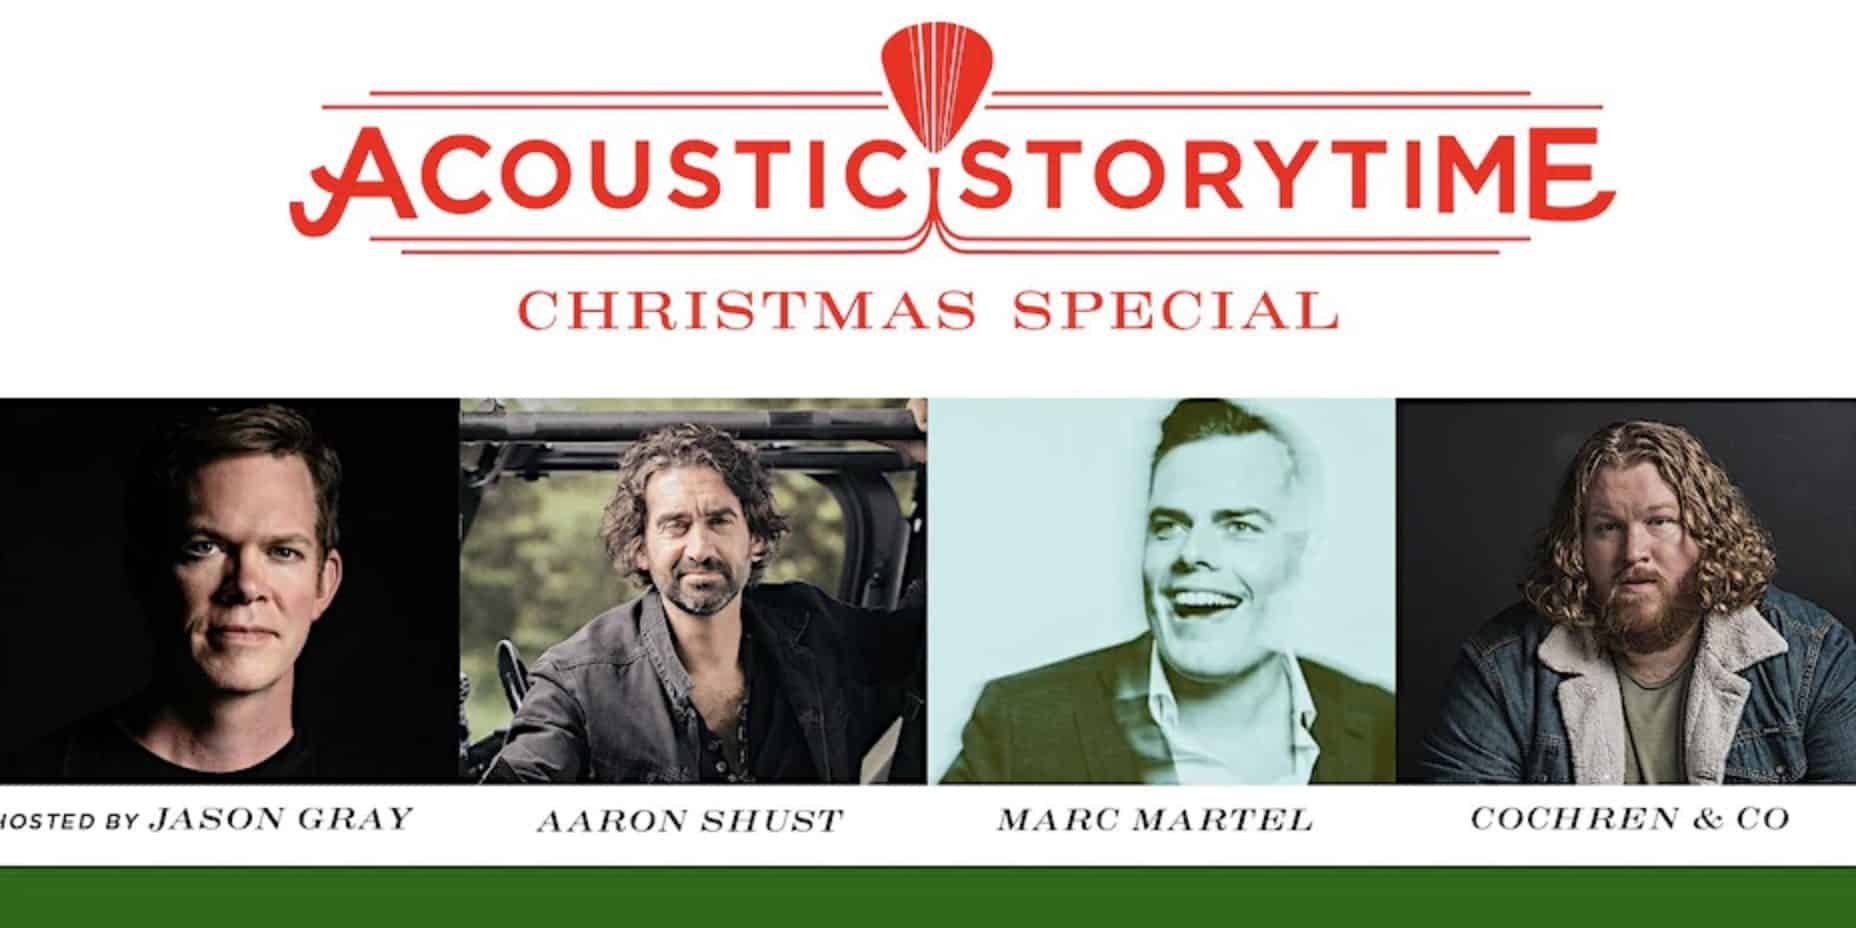 Acoustic Storytime Christmas Special Brentwood Tenn.